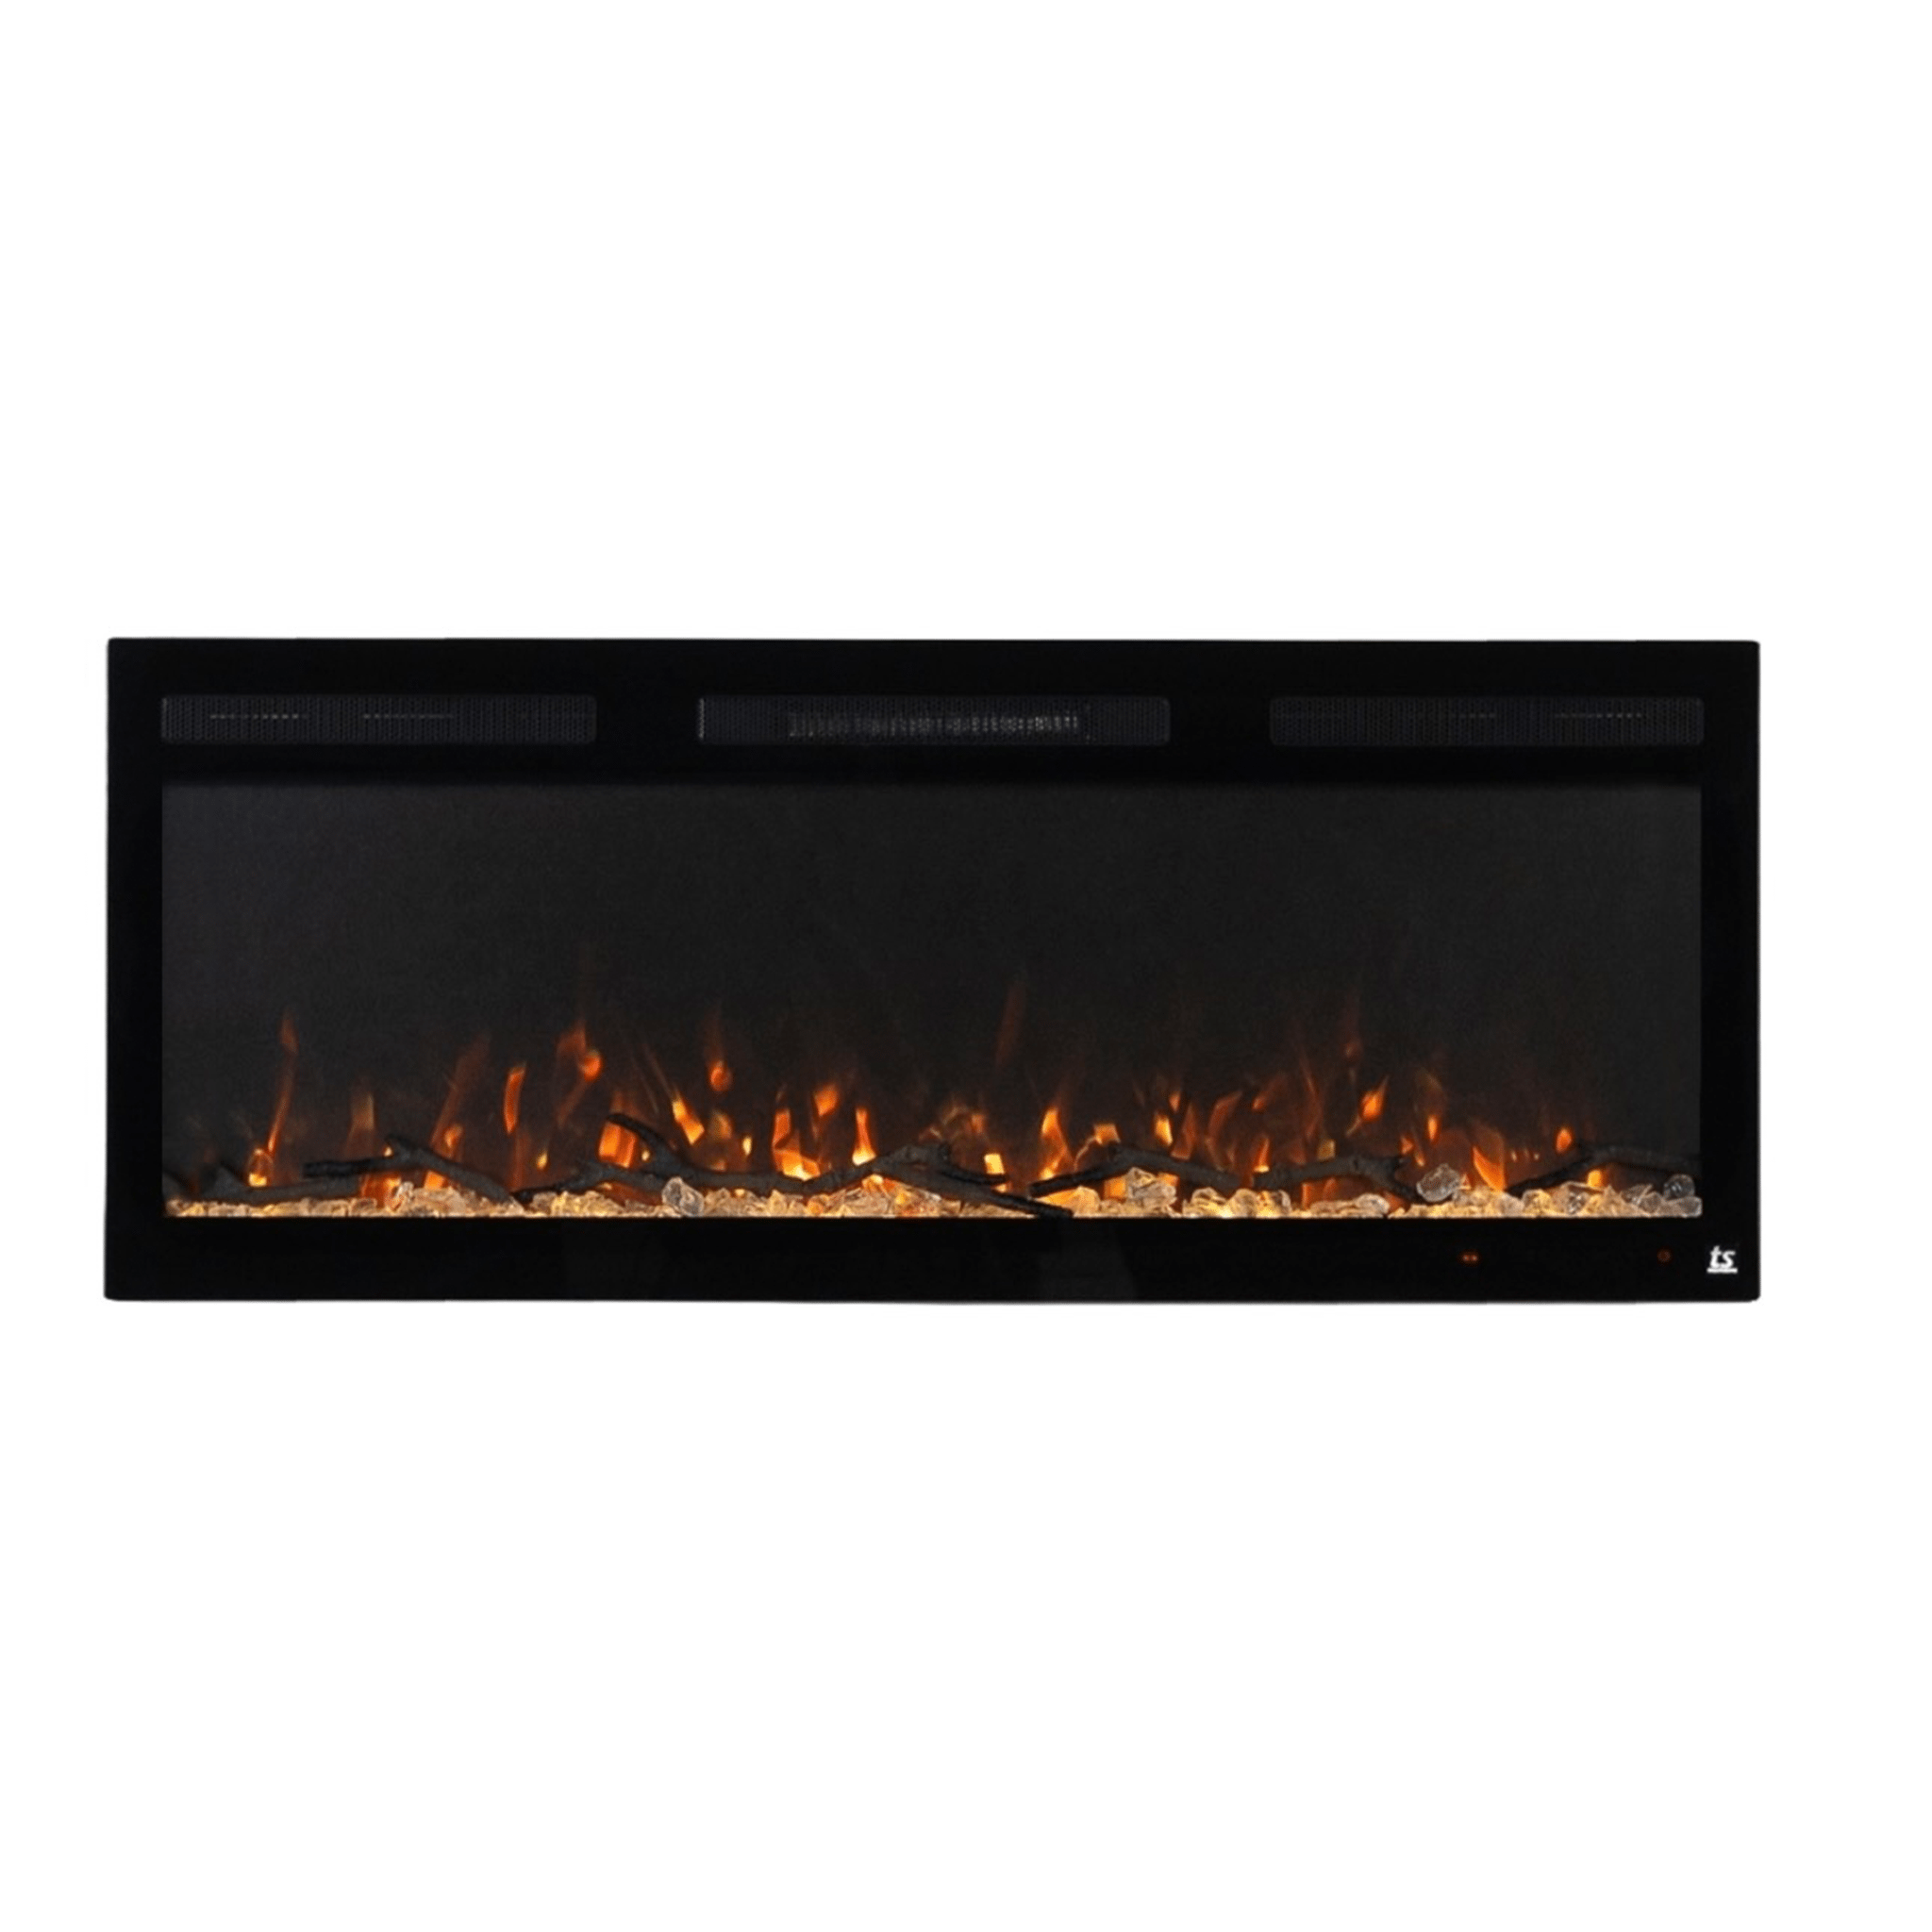 The Sideline Fury 50 Inch Recessed Smart Electric Fireplace 80054 front view